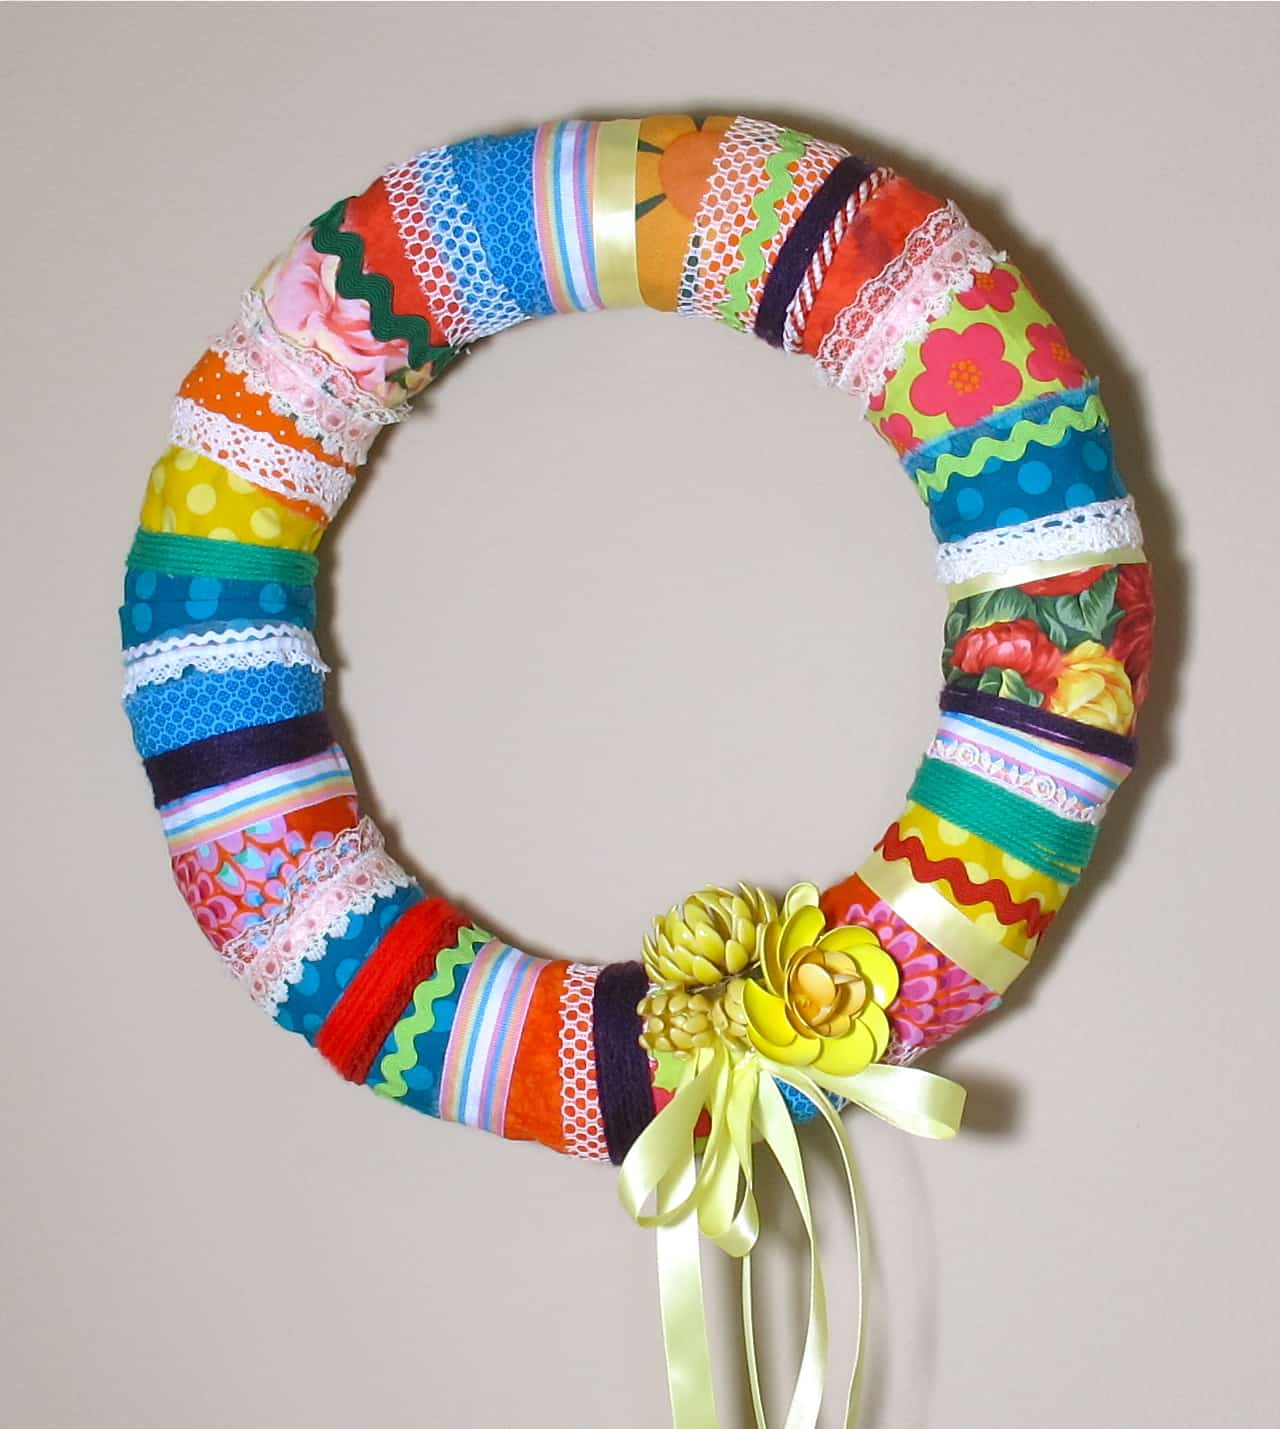 Stunning Crafts Made with Ribbons